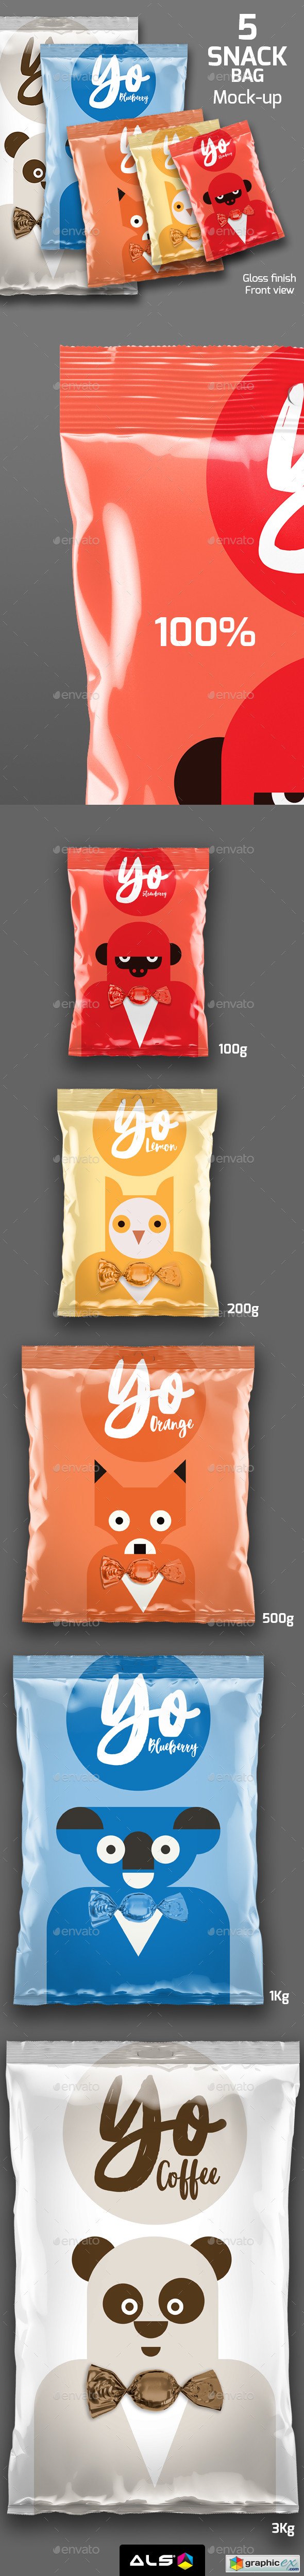 5 Snack Bags Mock-up